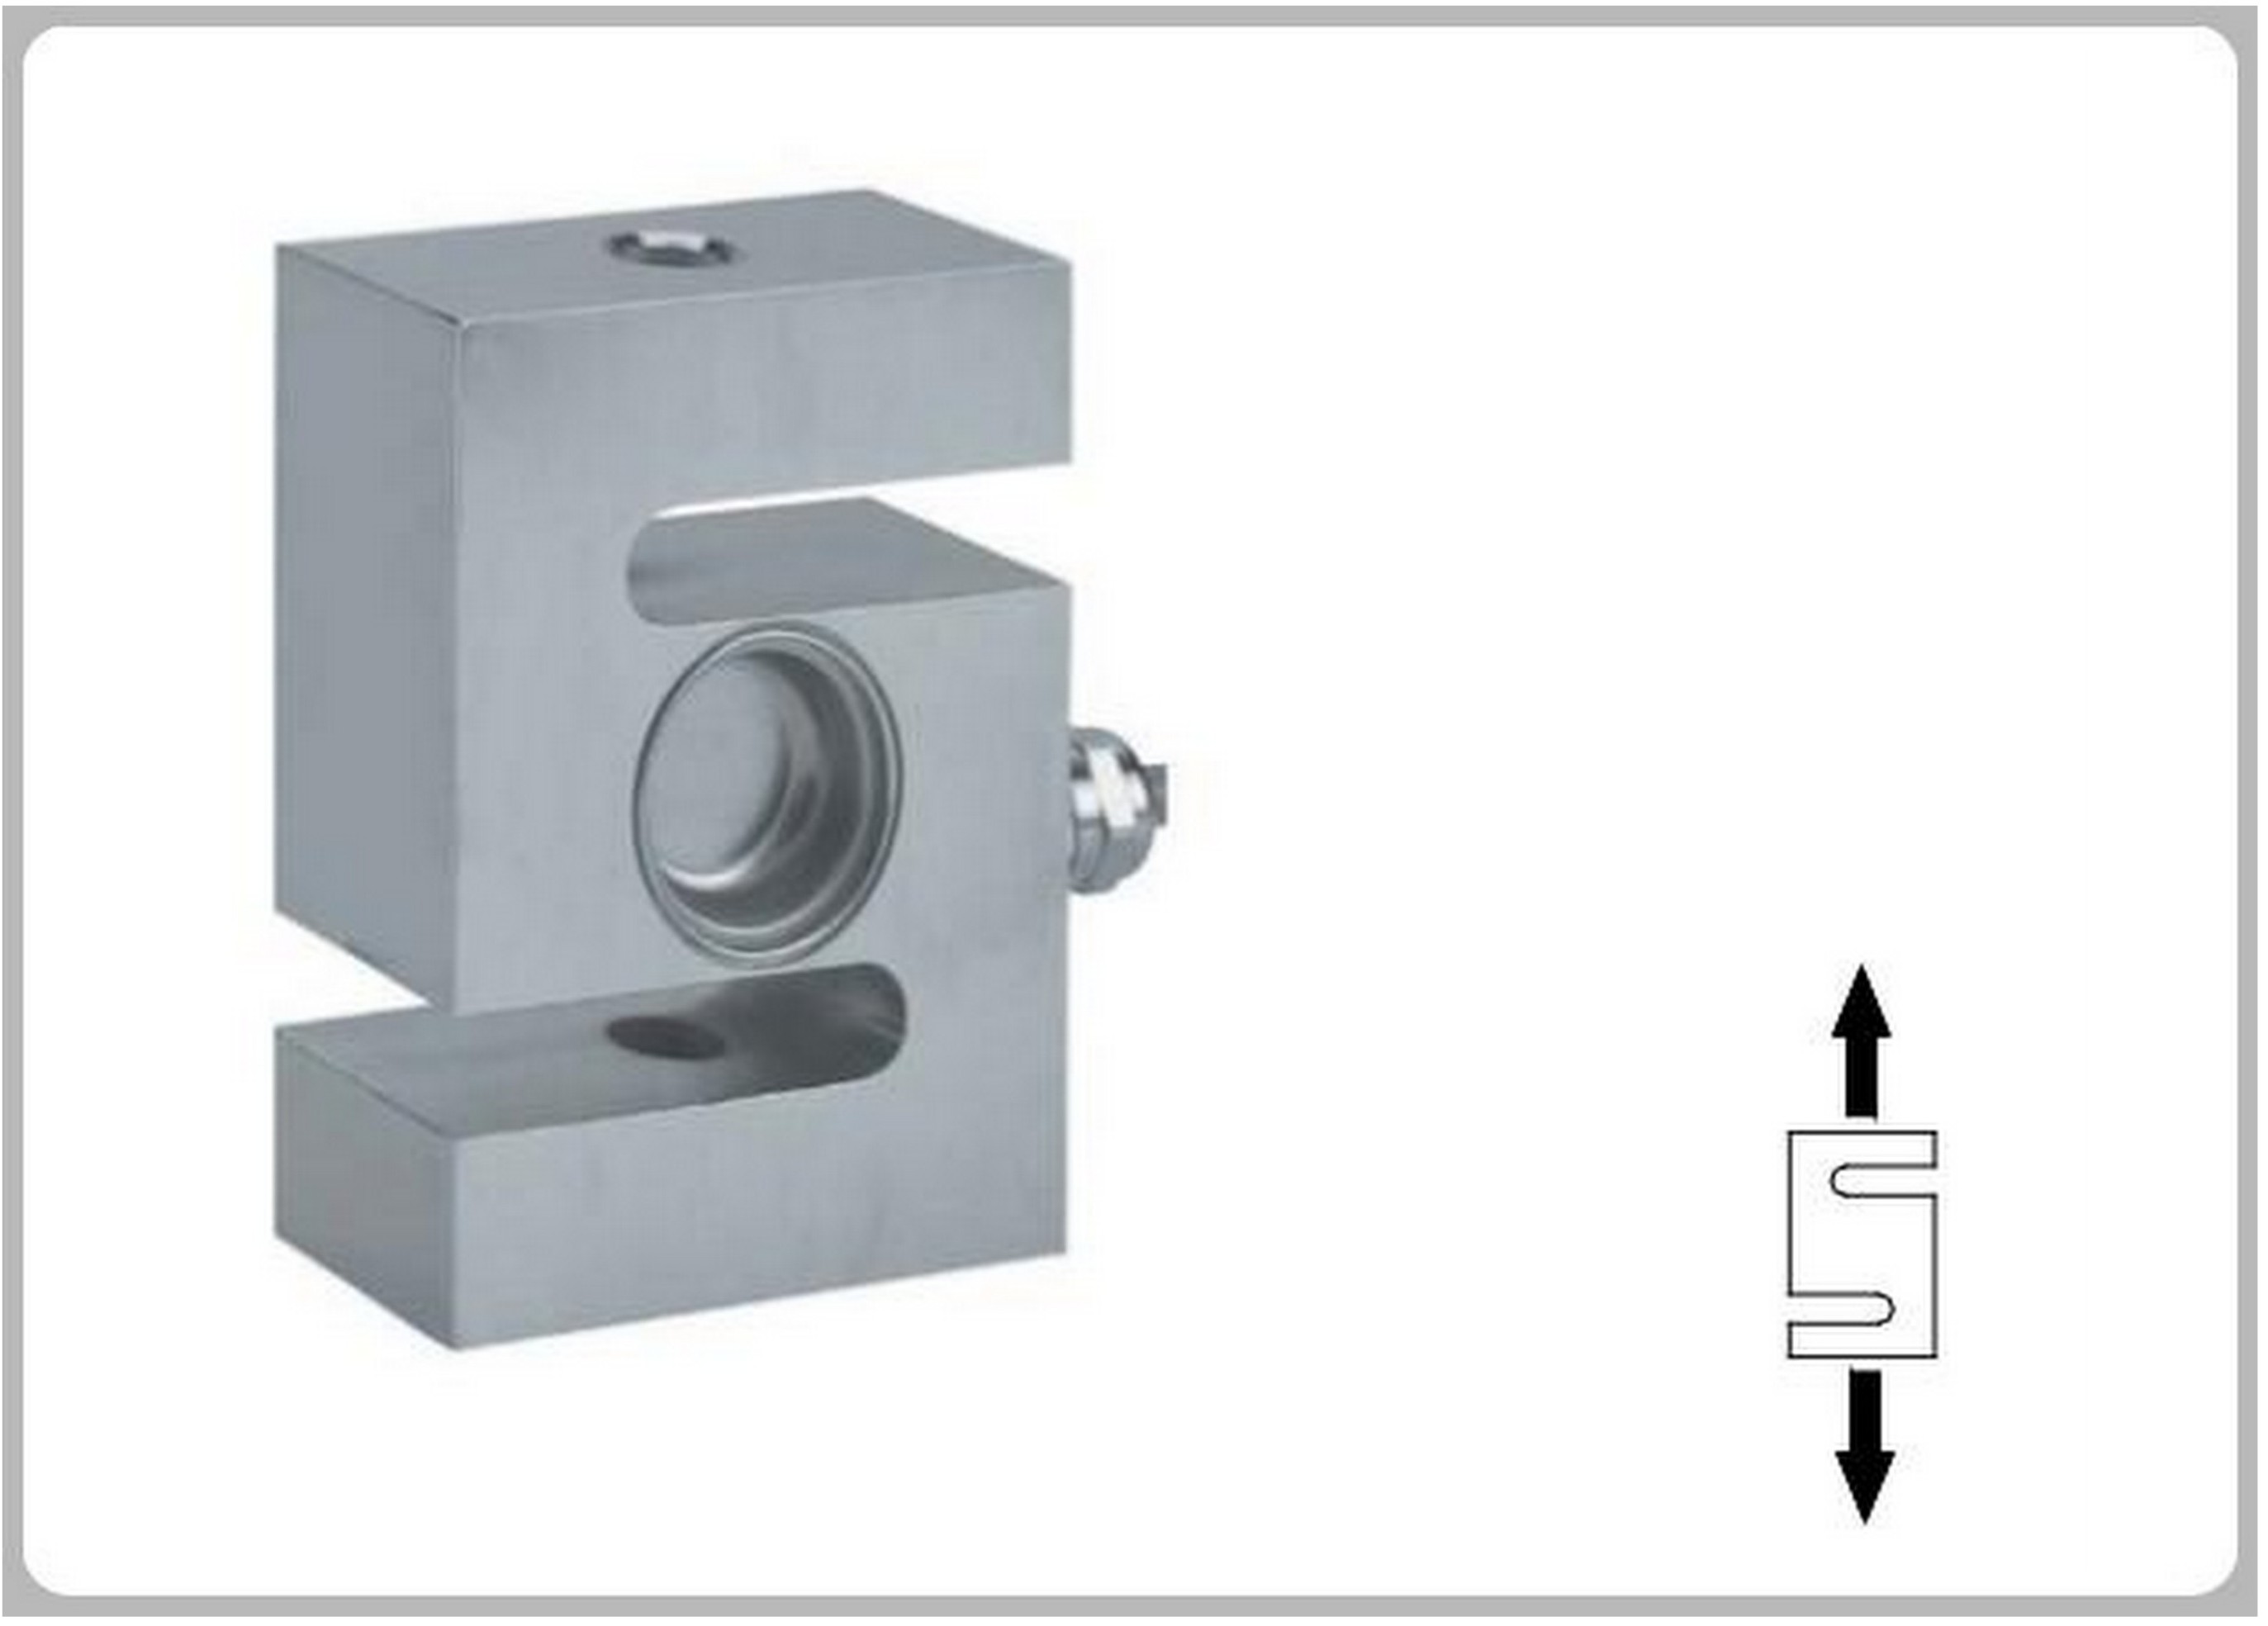 MC8115 LOAD CELL & FORCE TRANSDUCER